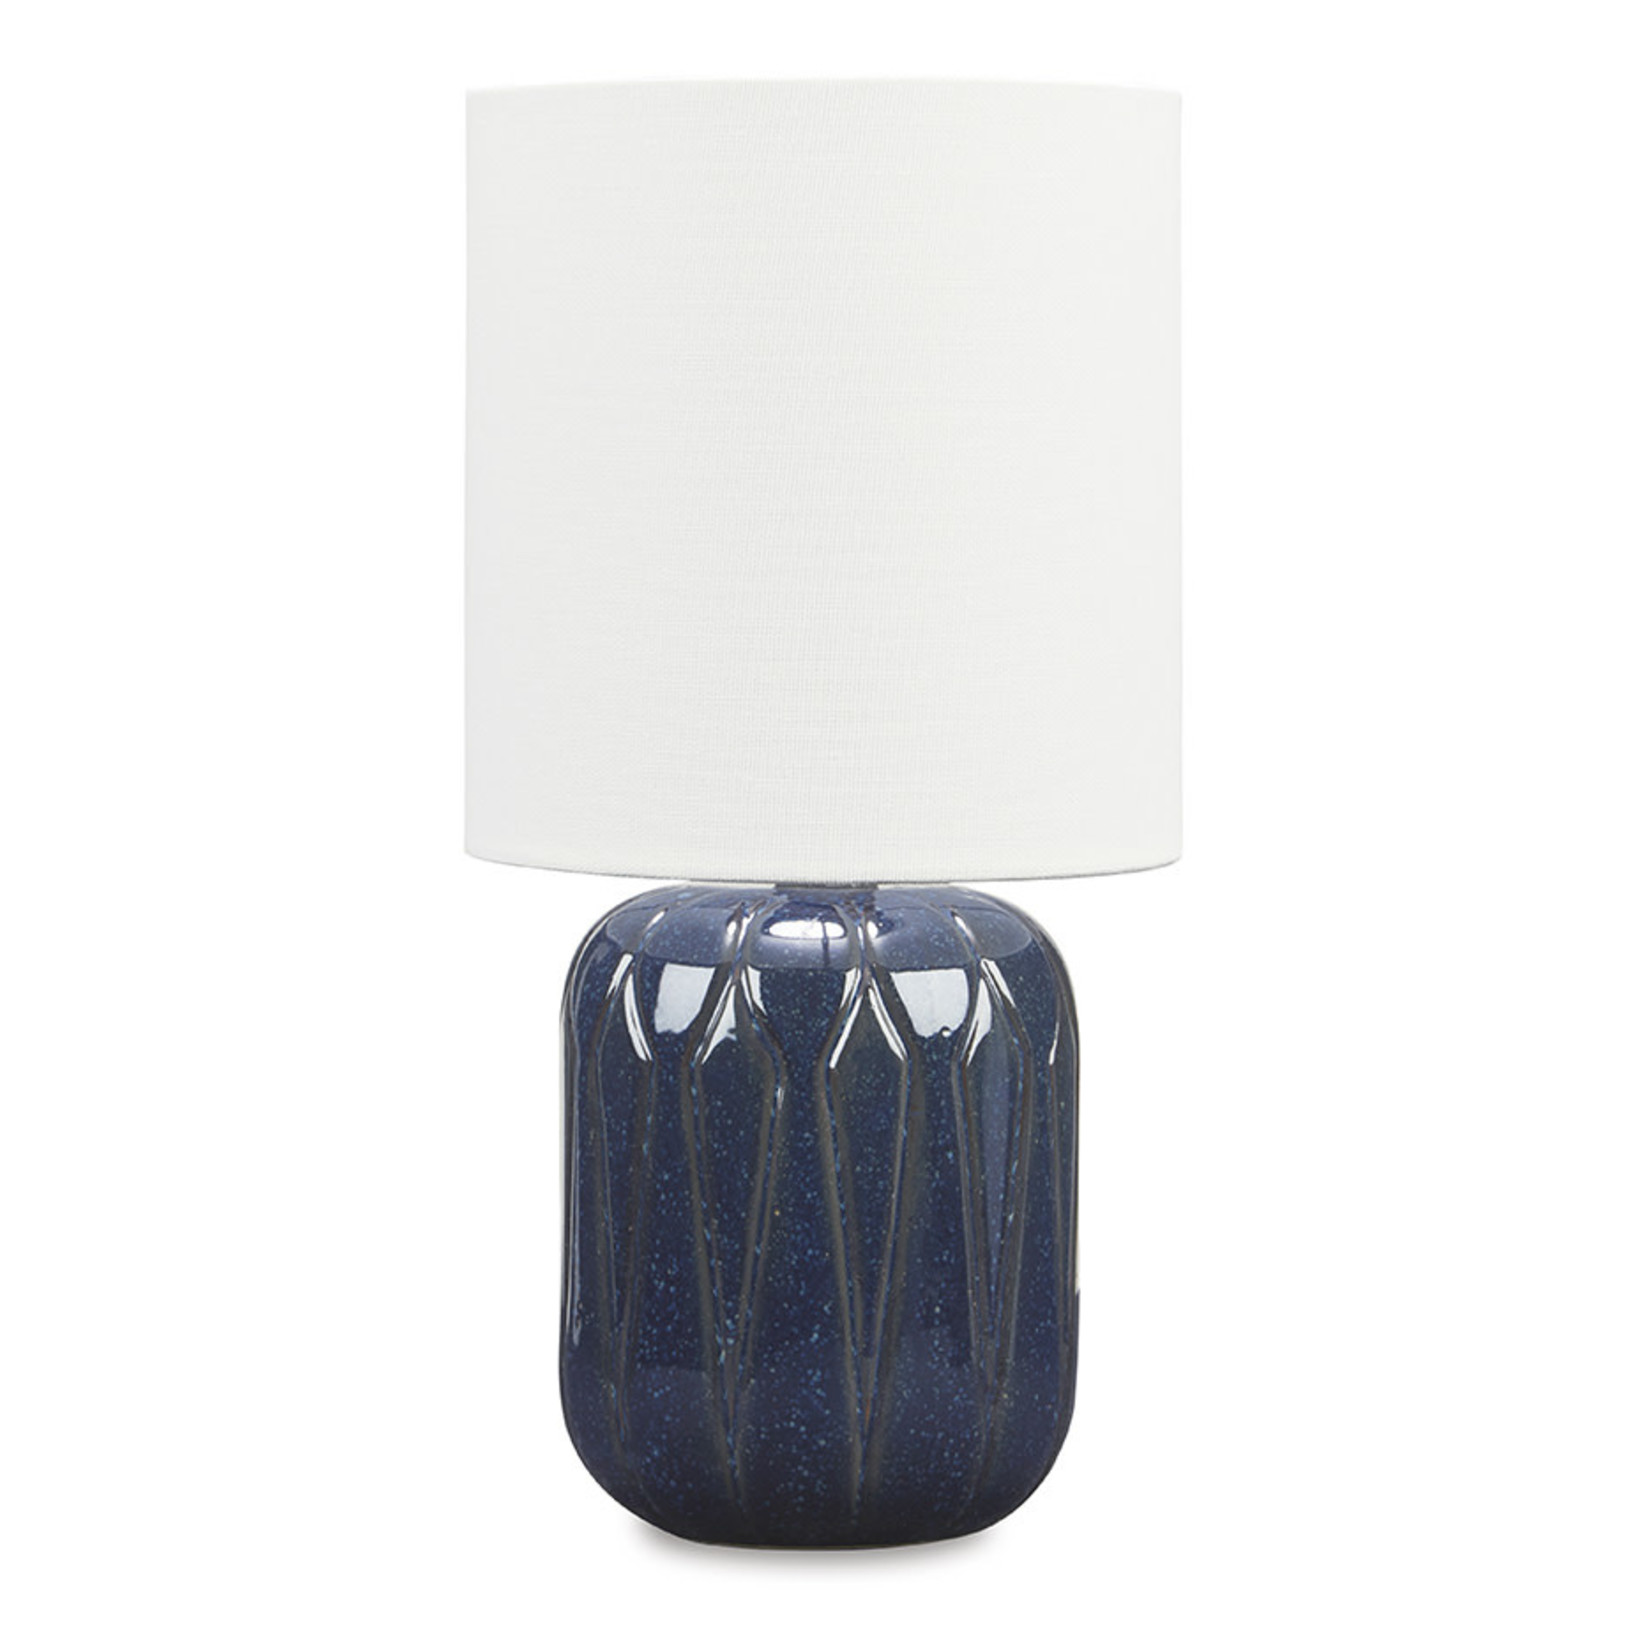 ASHLEY FURNITURE HENGROVE NAVY CERAMIC TABLE LAMP BY ASHLEY